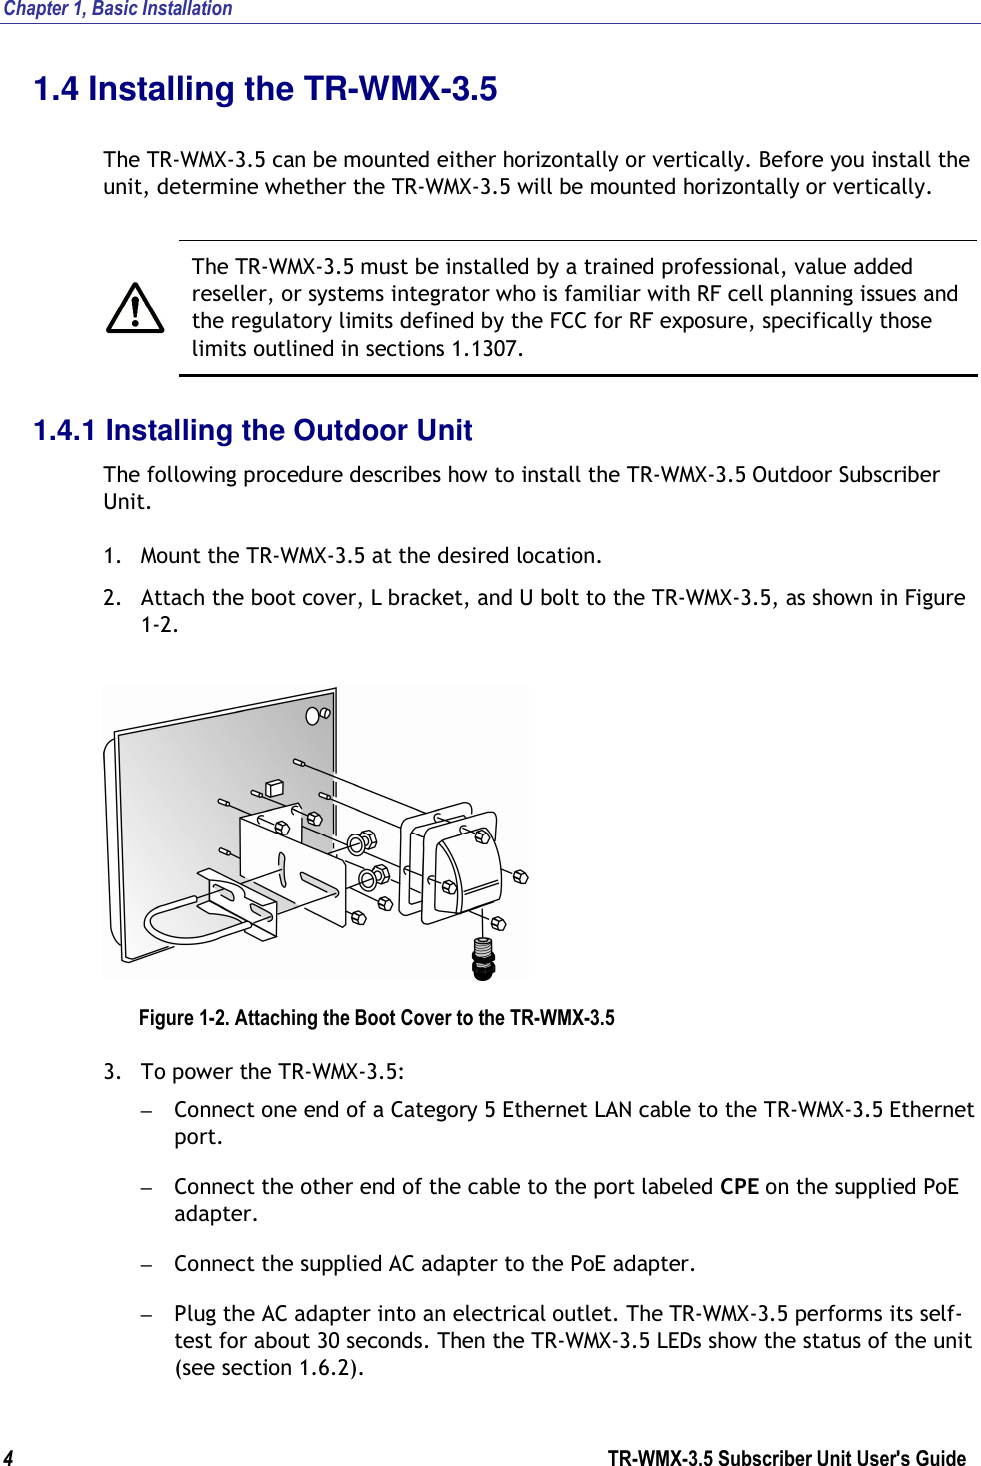 Chapter 1, Basic Installation  4                      TR-WMX-3.5 Subscriber Unit User&apos;s Guide  1.4 Installing the TR-WMX-3.5  The TR-WMX-3.5 can be mounted either horizontally or vertically. Before you install the unit, determine whether the TR-WMX-3.5 will be mounted horizontally or vertically.    The TR-WMX-3.5 must be installed by a trained professional, value added reseller, or systems integrator who is familiar with RF cell planning issues and the regulatory limits defined by the FCC for RF exposure, specifically those limits outlined in sections 1.1307. 1.4.1 Installing the Outdoor Unit The following procedure describes how to install the TR-WMX-3.5 Outdoor Subscriber Unit. 1. Mount the TR-WMX-3.5 at the desired location. 2. Attach the boot cover, L bracket, and U bolt to the TR-WMX-3.5, as shown in Figure 1-2.  Figure 1-2. Attaching the Boot Cover to the TR-WMX-3.5 3. To power the TR-WMX-3.5: – Connect one end of a Category 5 Ethernet LAN cable to the TR-WMX-3.5 Ethernet port. – Connect the other end of the cable to the port labeled CPE on the supplied PoE adapter. – Connect the supplied AC adapter to the PoE adapter. – Plug the AC adapter into an electrical outlet. The TR-WMX-3.5 performs its self-test for about 30 seconds. Then the TR-WMX-3.5 LEDs show the status of the unit (see section 1.6.2).  